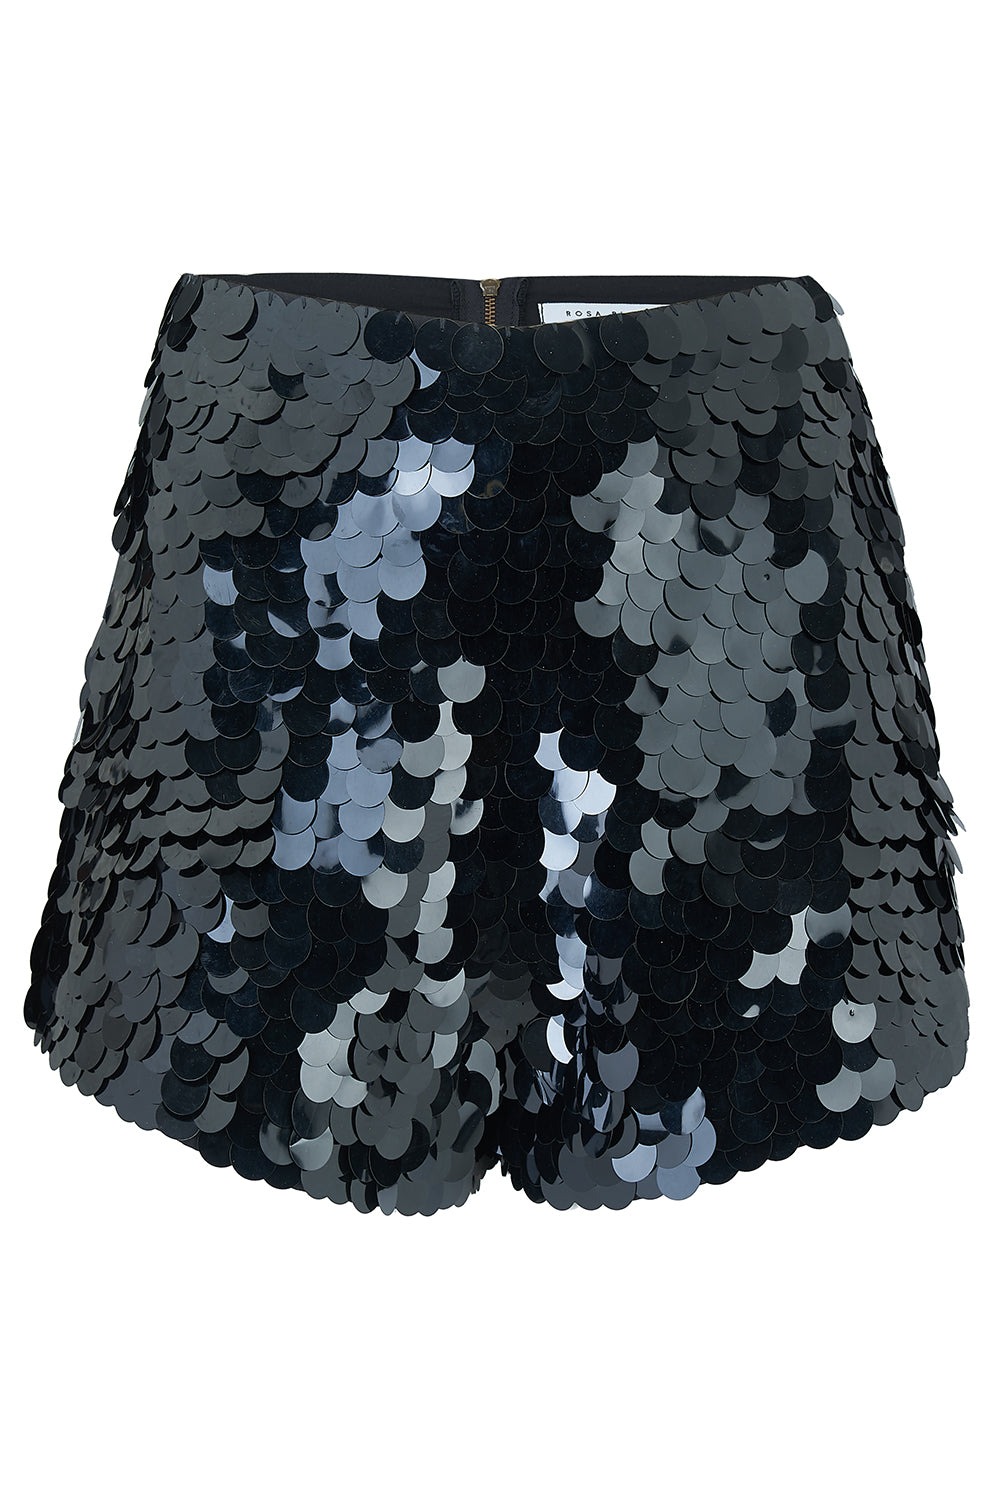 Rosa Bloom black glossy sequin shorts high-waisted